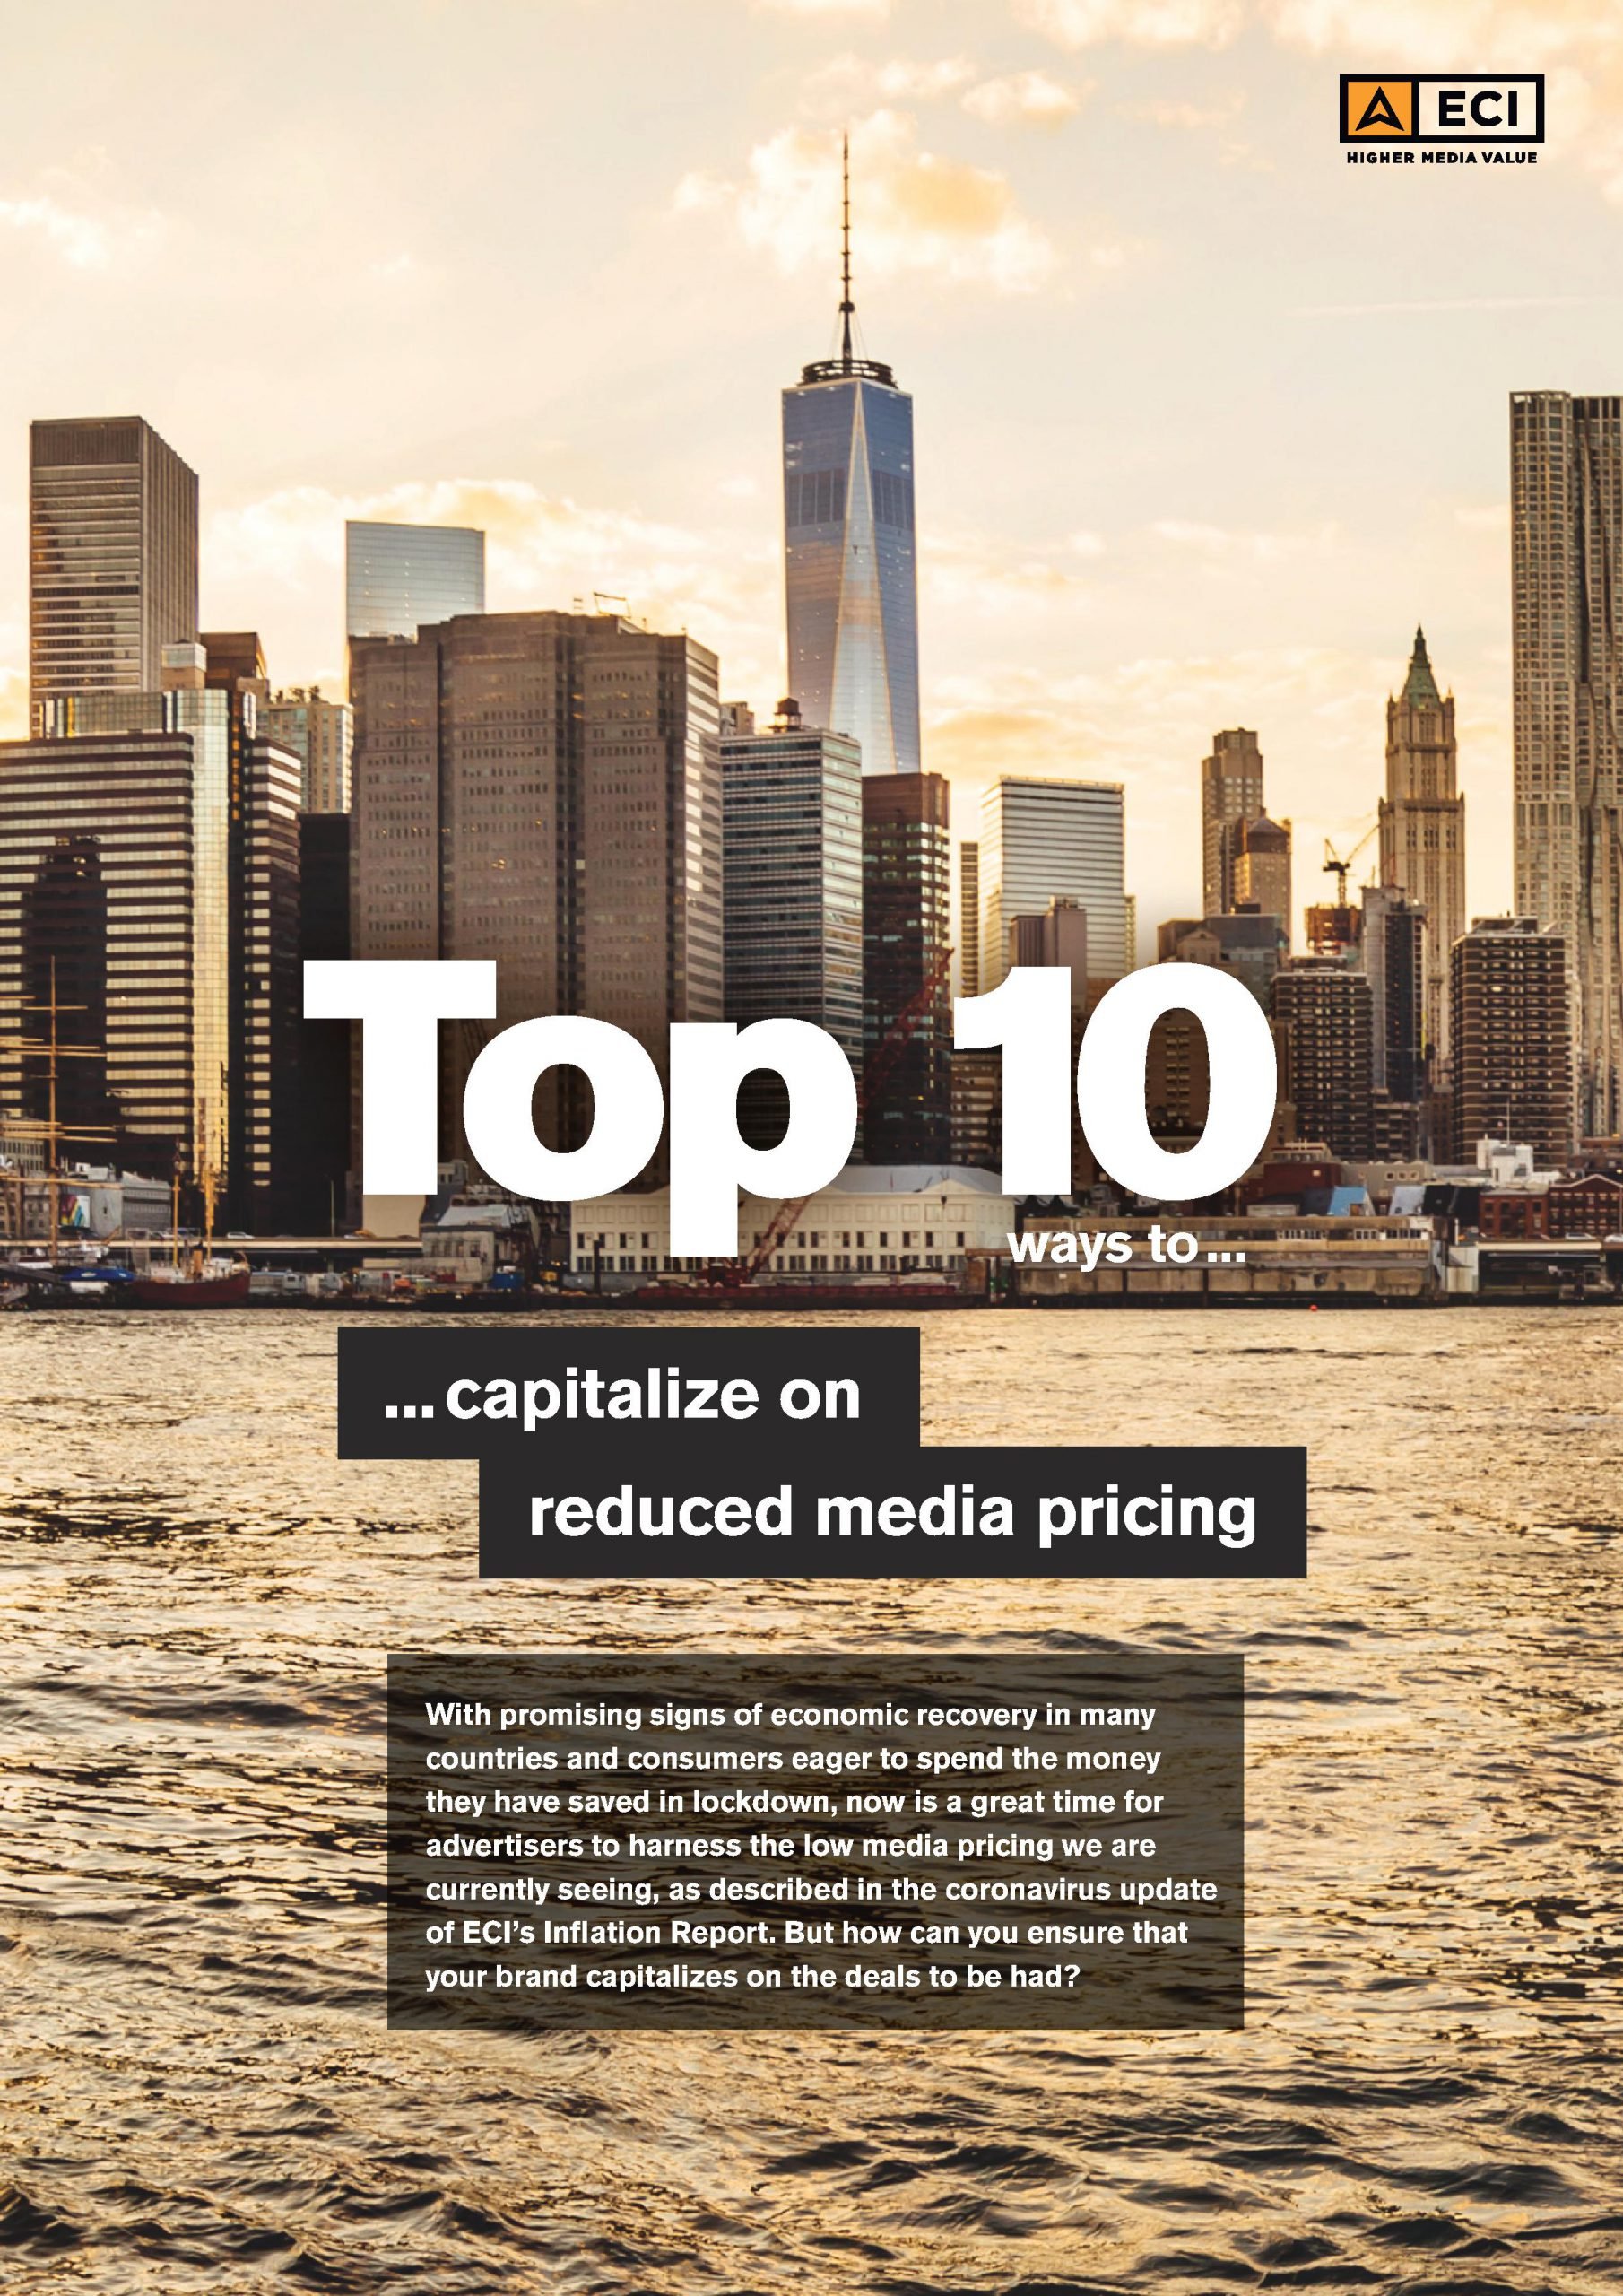 Top 10 ways to capitalize on reduced media pricing